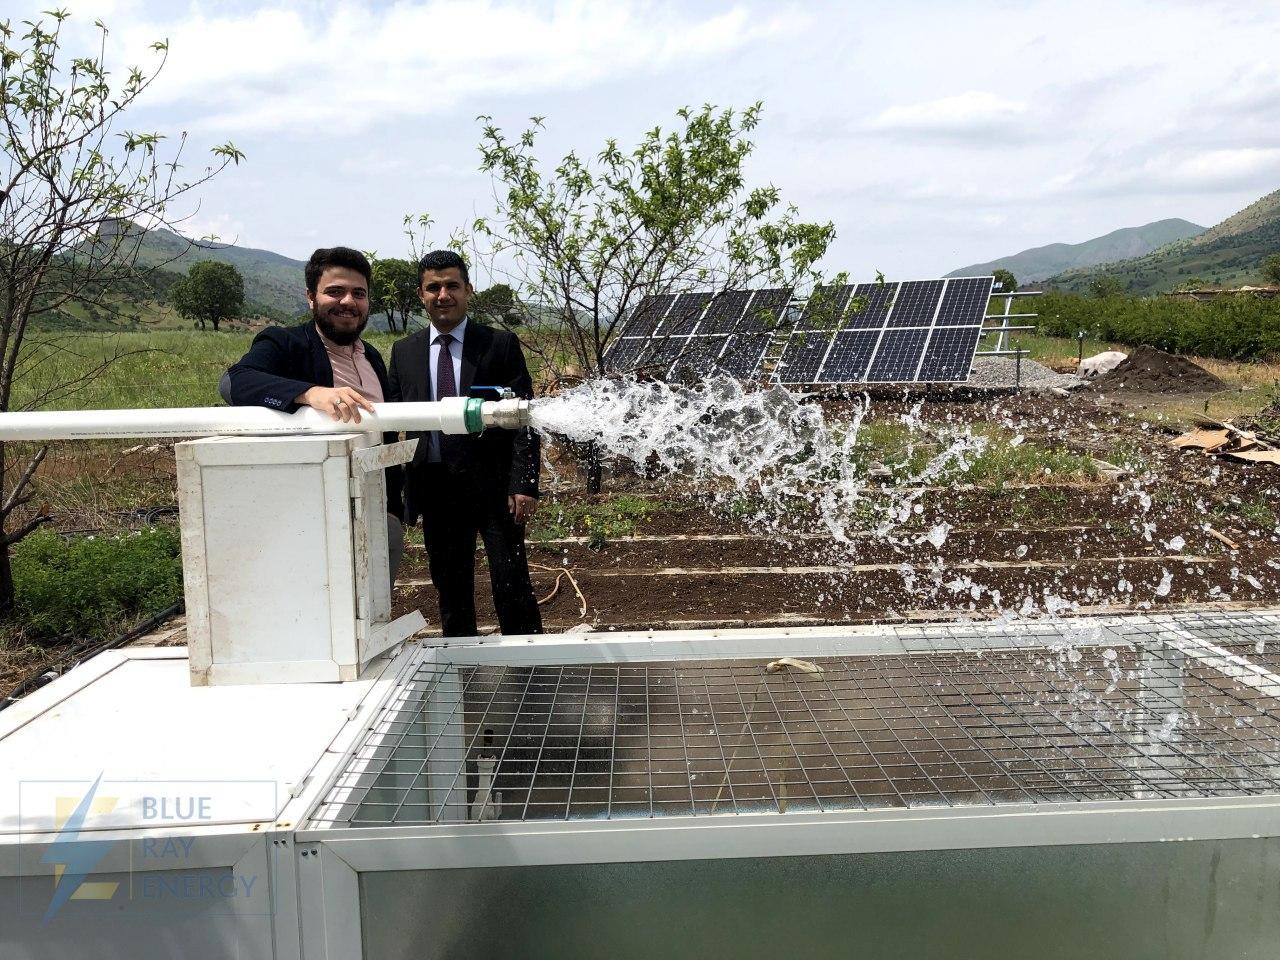 Overfladisk gentagelse maling Solar water pumping systems for 11 villages in Iraq - LORENTZ